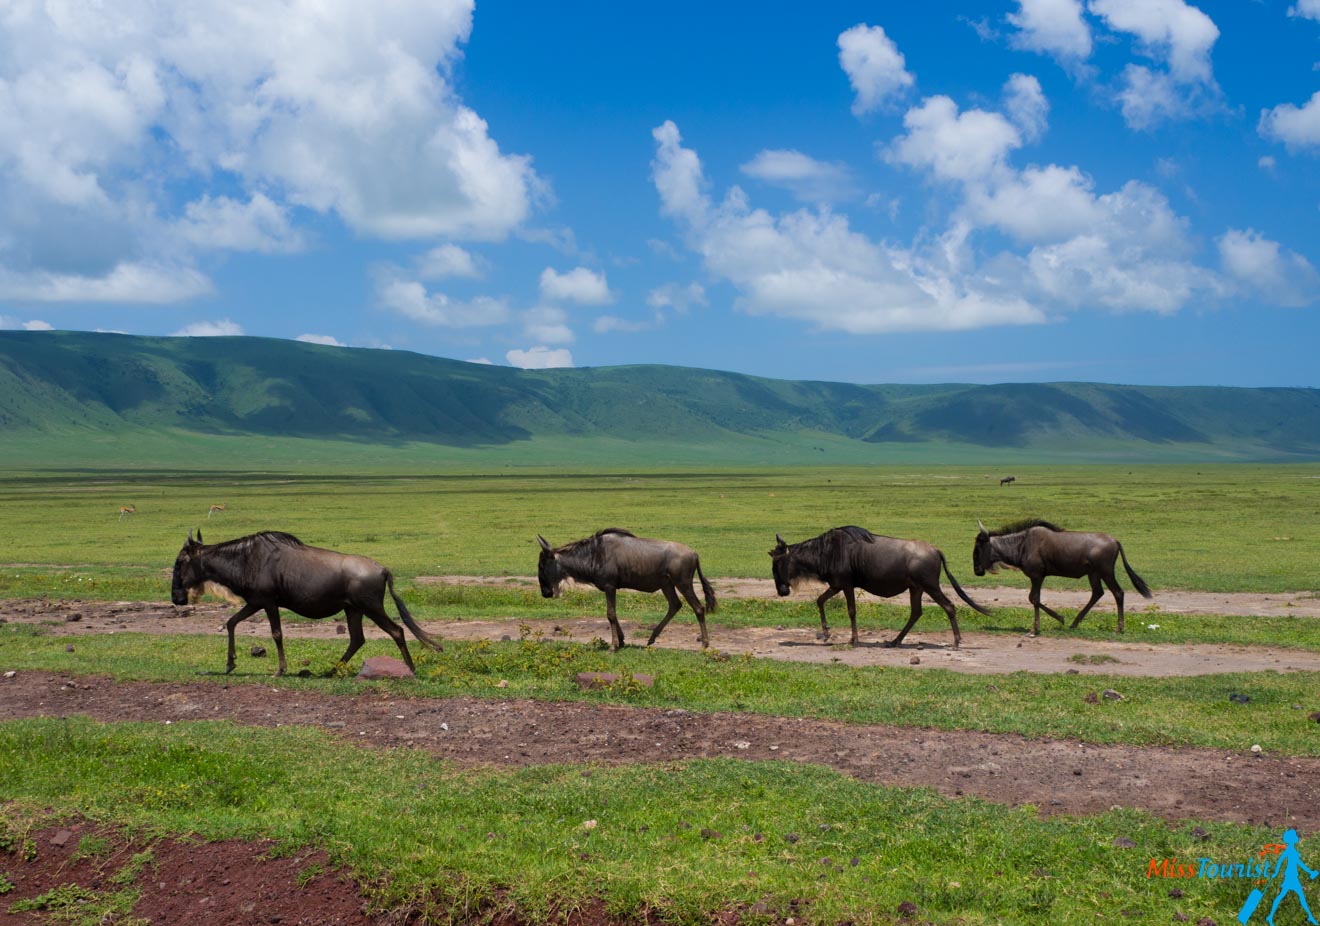 How To Plan A Perfect Safari In Tanzania – 7 Things You Need To Know 14